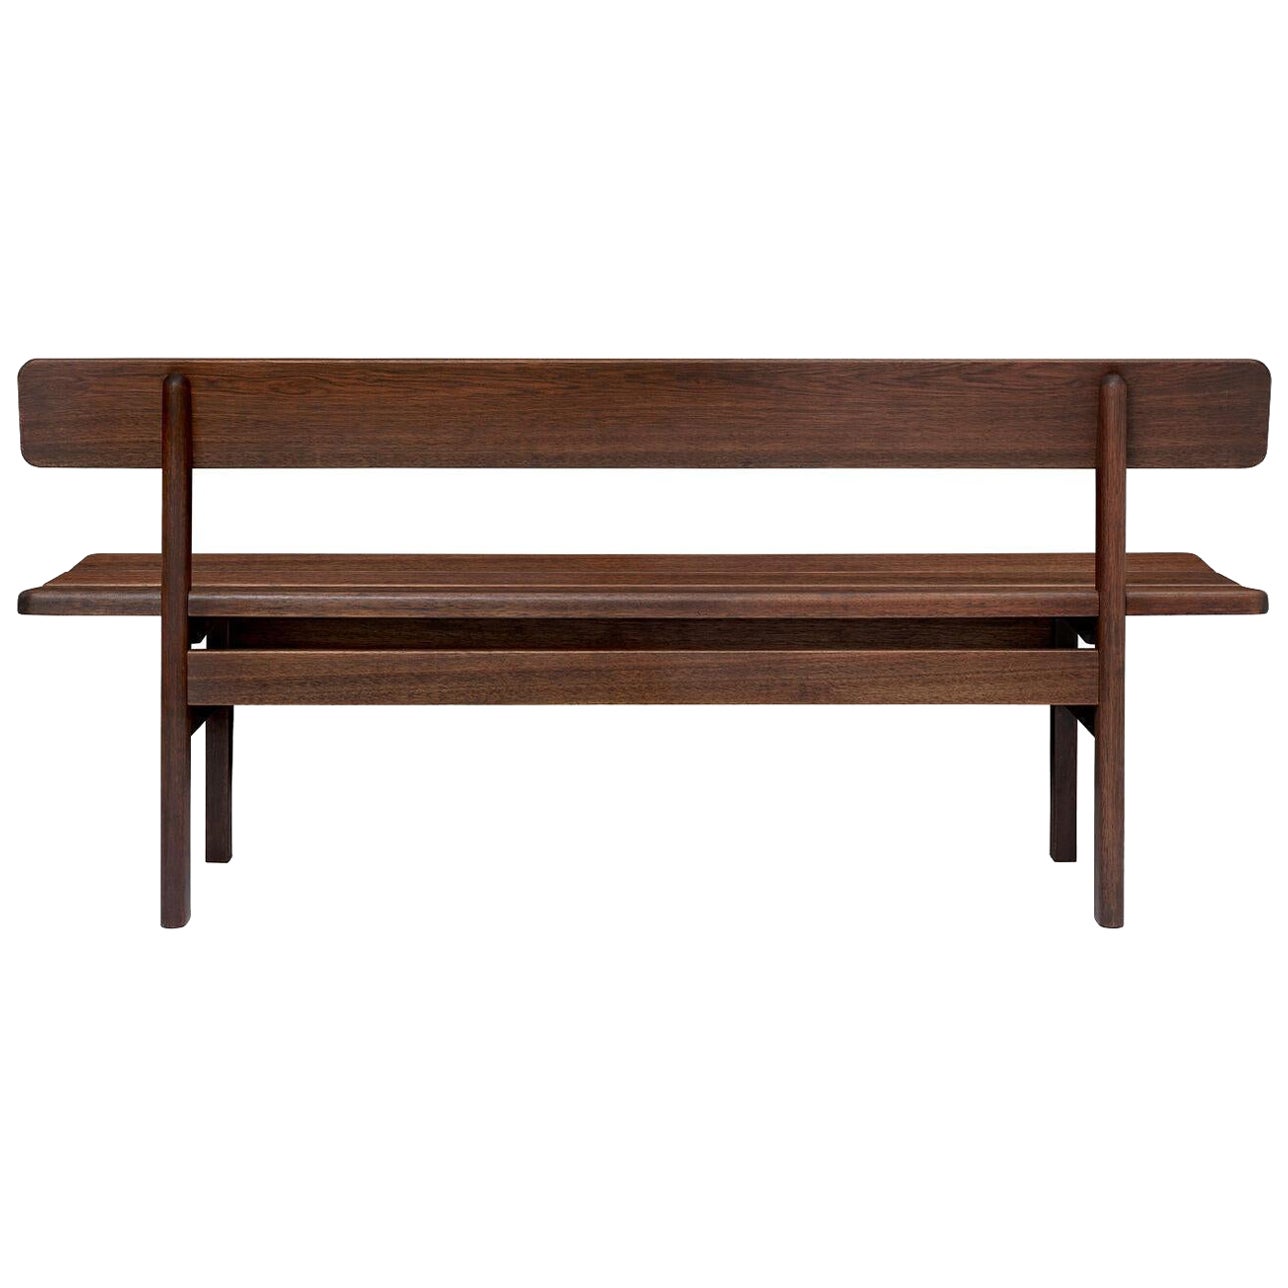 BM0699 Asserbo Bench with Back in Dark Oil Stained Eucalyptus Wood *Quickship* For Sale